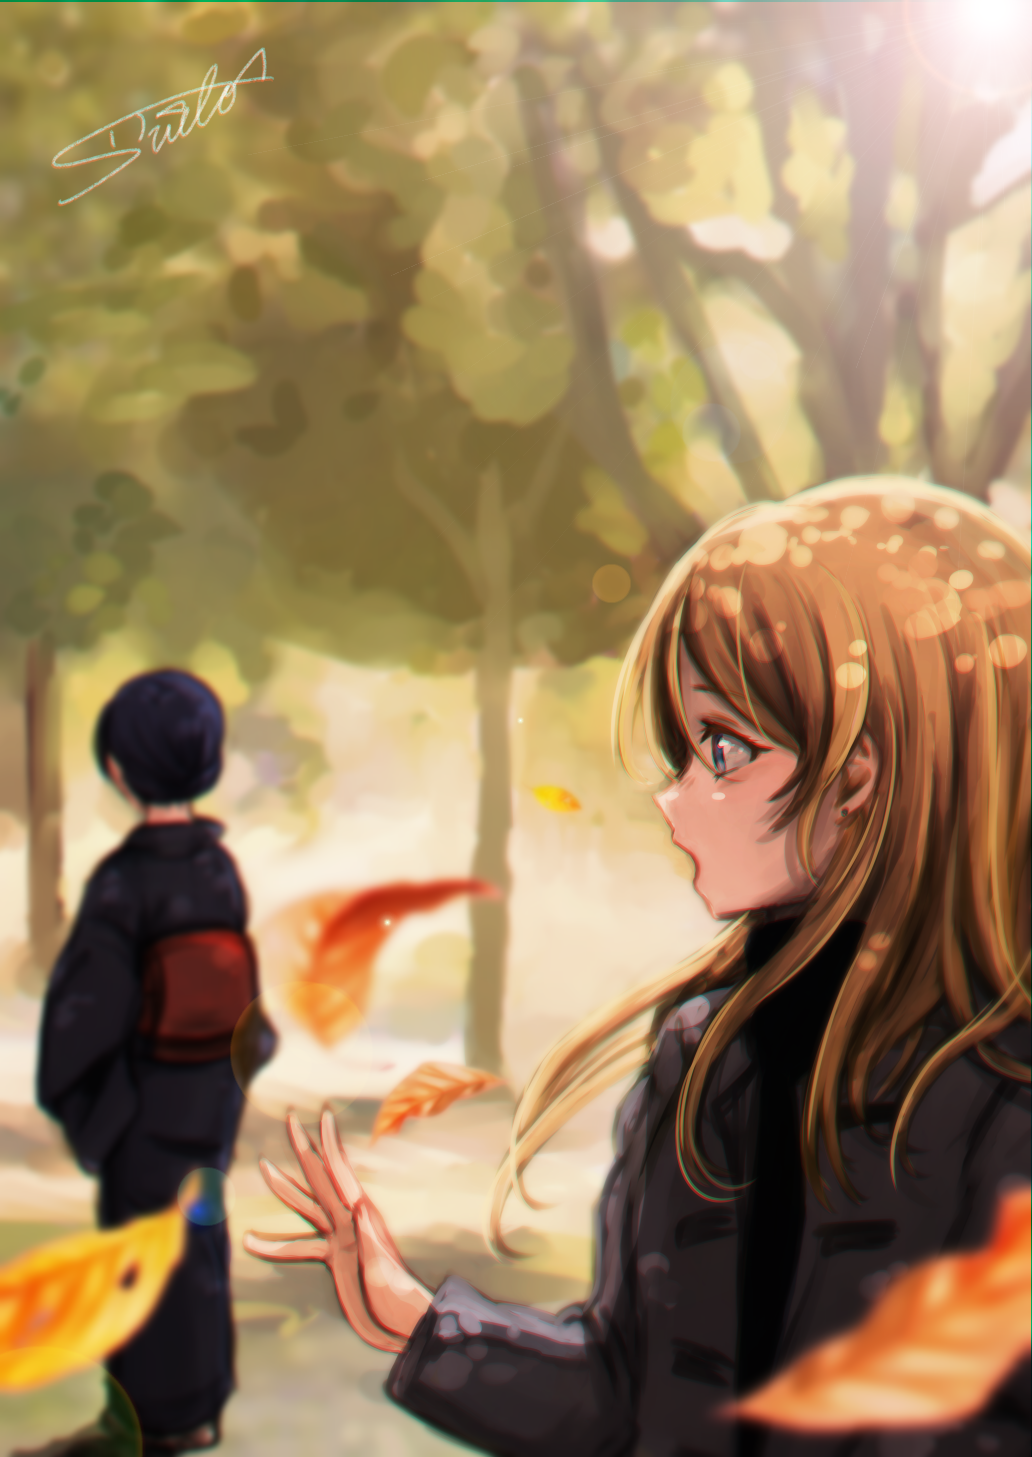 2girls autumn_leaves ayase_eli blonde_hair blue_eyes blue_hair blurry_background coat hair_down hair_up highres japanese_clothes kimono lens_flare lilylion26 long_sleeves love_live! love_live!_school_idol_project multiple_girls obi open_mouth sash signature sonoda_umi